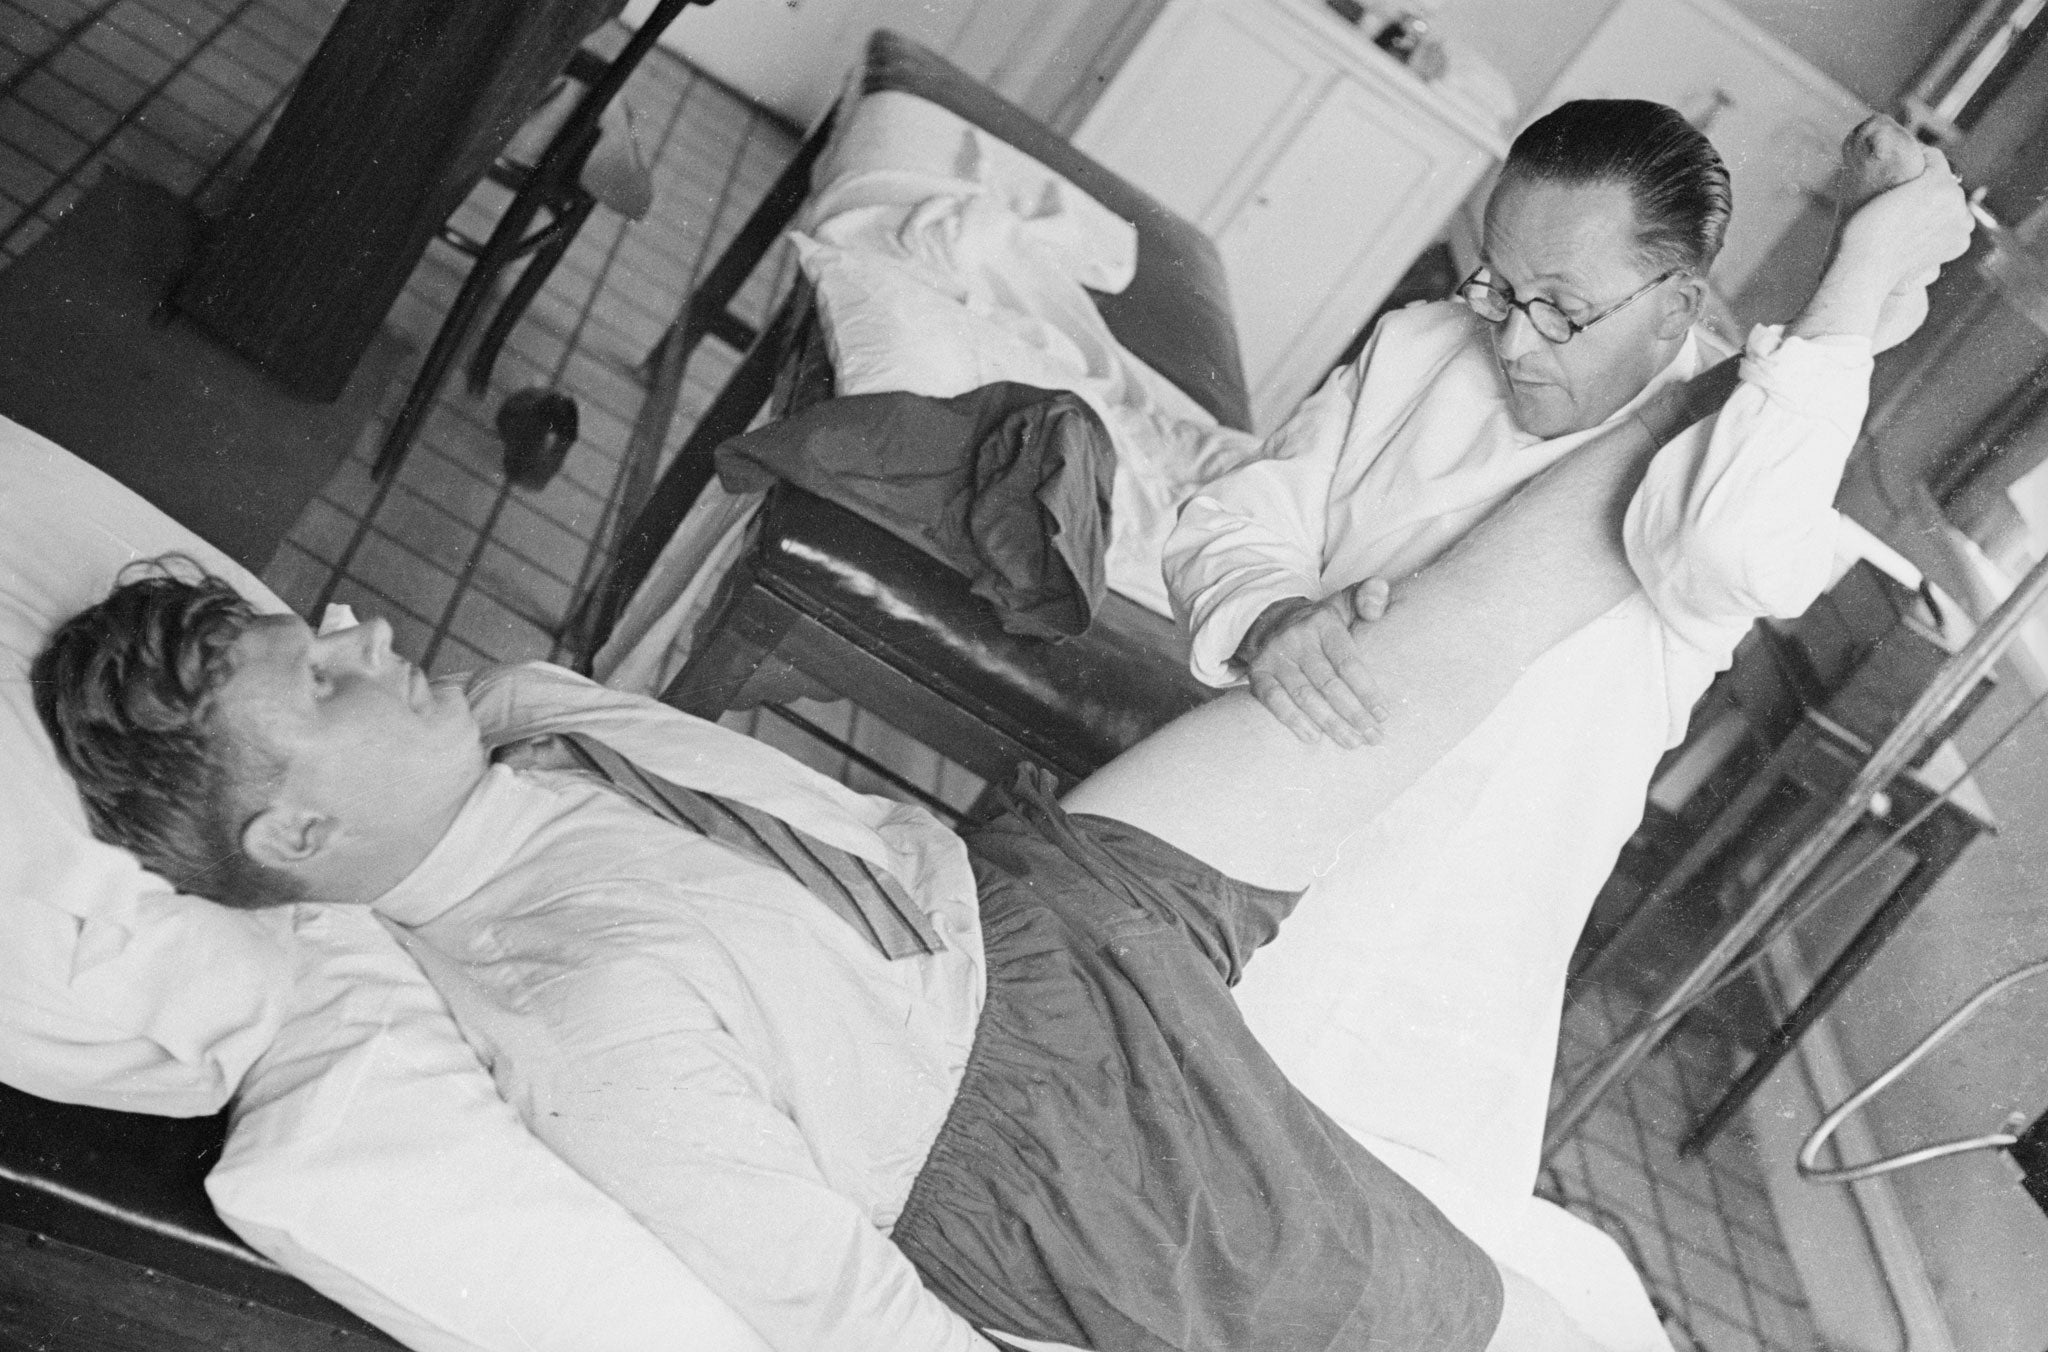 An osteopath manipulates a patient's joints at the British School of Osteopathy in London, in 1940